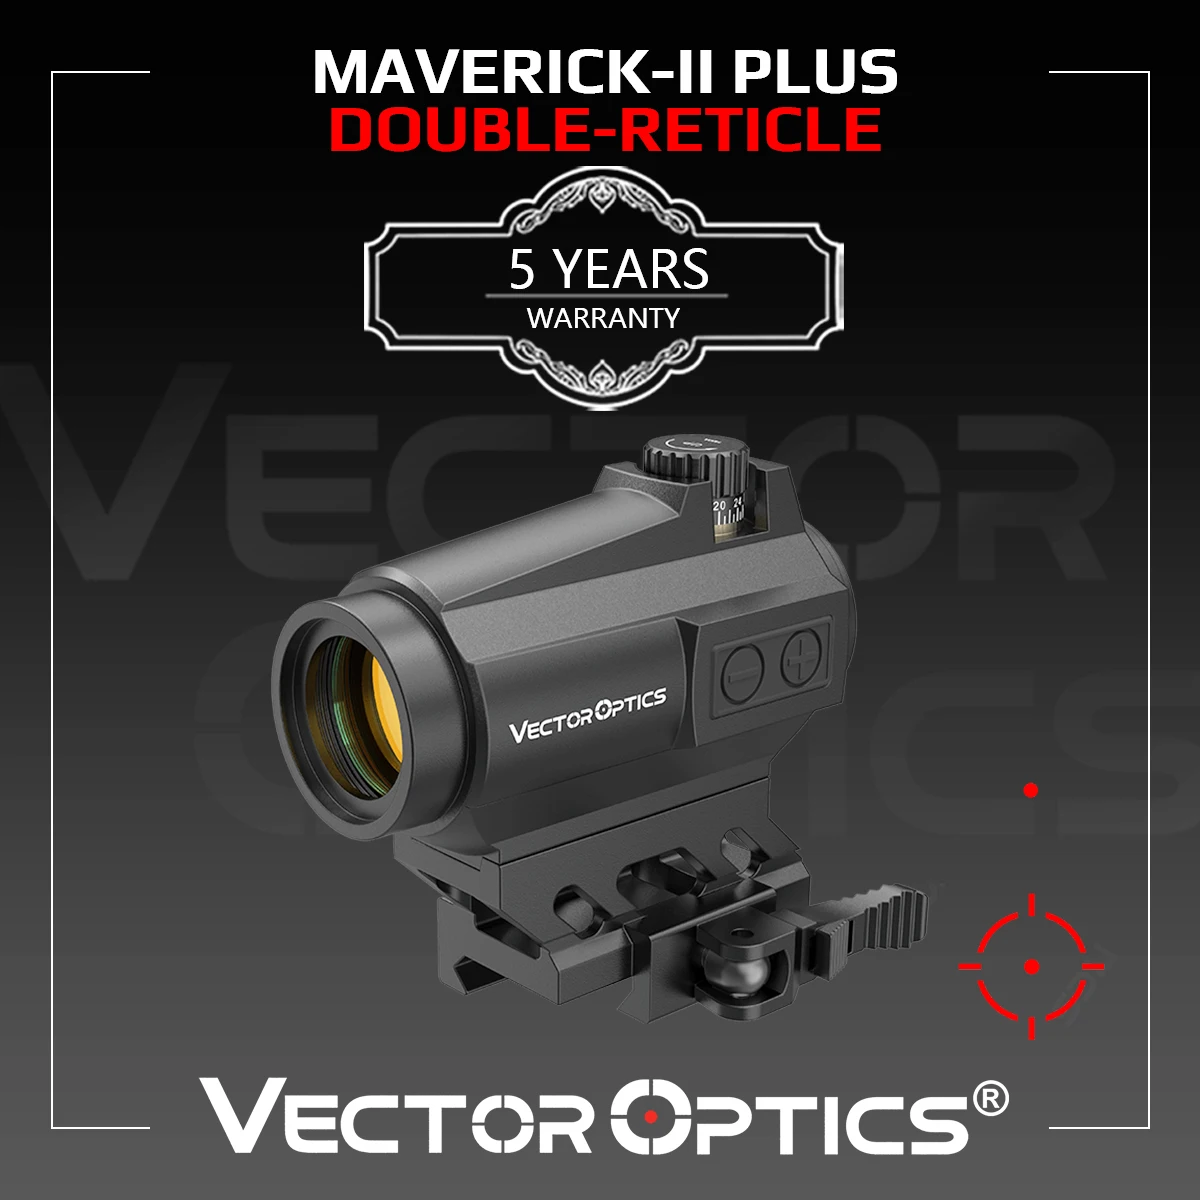 Vector Optics Maverick-II Plus 1x22 DBR Double-Reticle Red Dot Sight 2MOA With with 9 Levels Intensity Fit AR 15 .223 .308 12GA